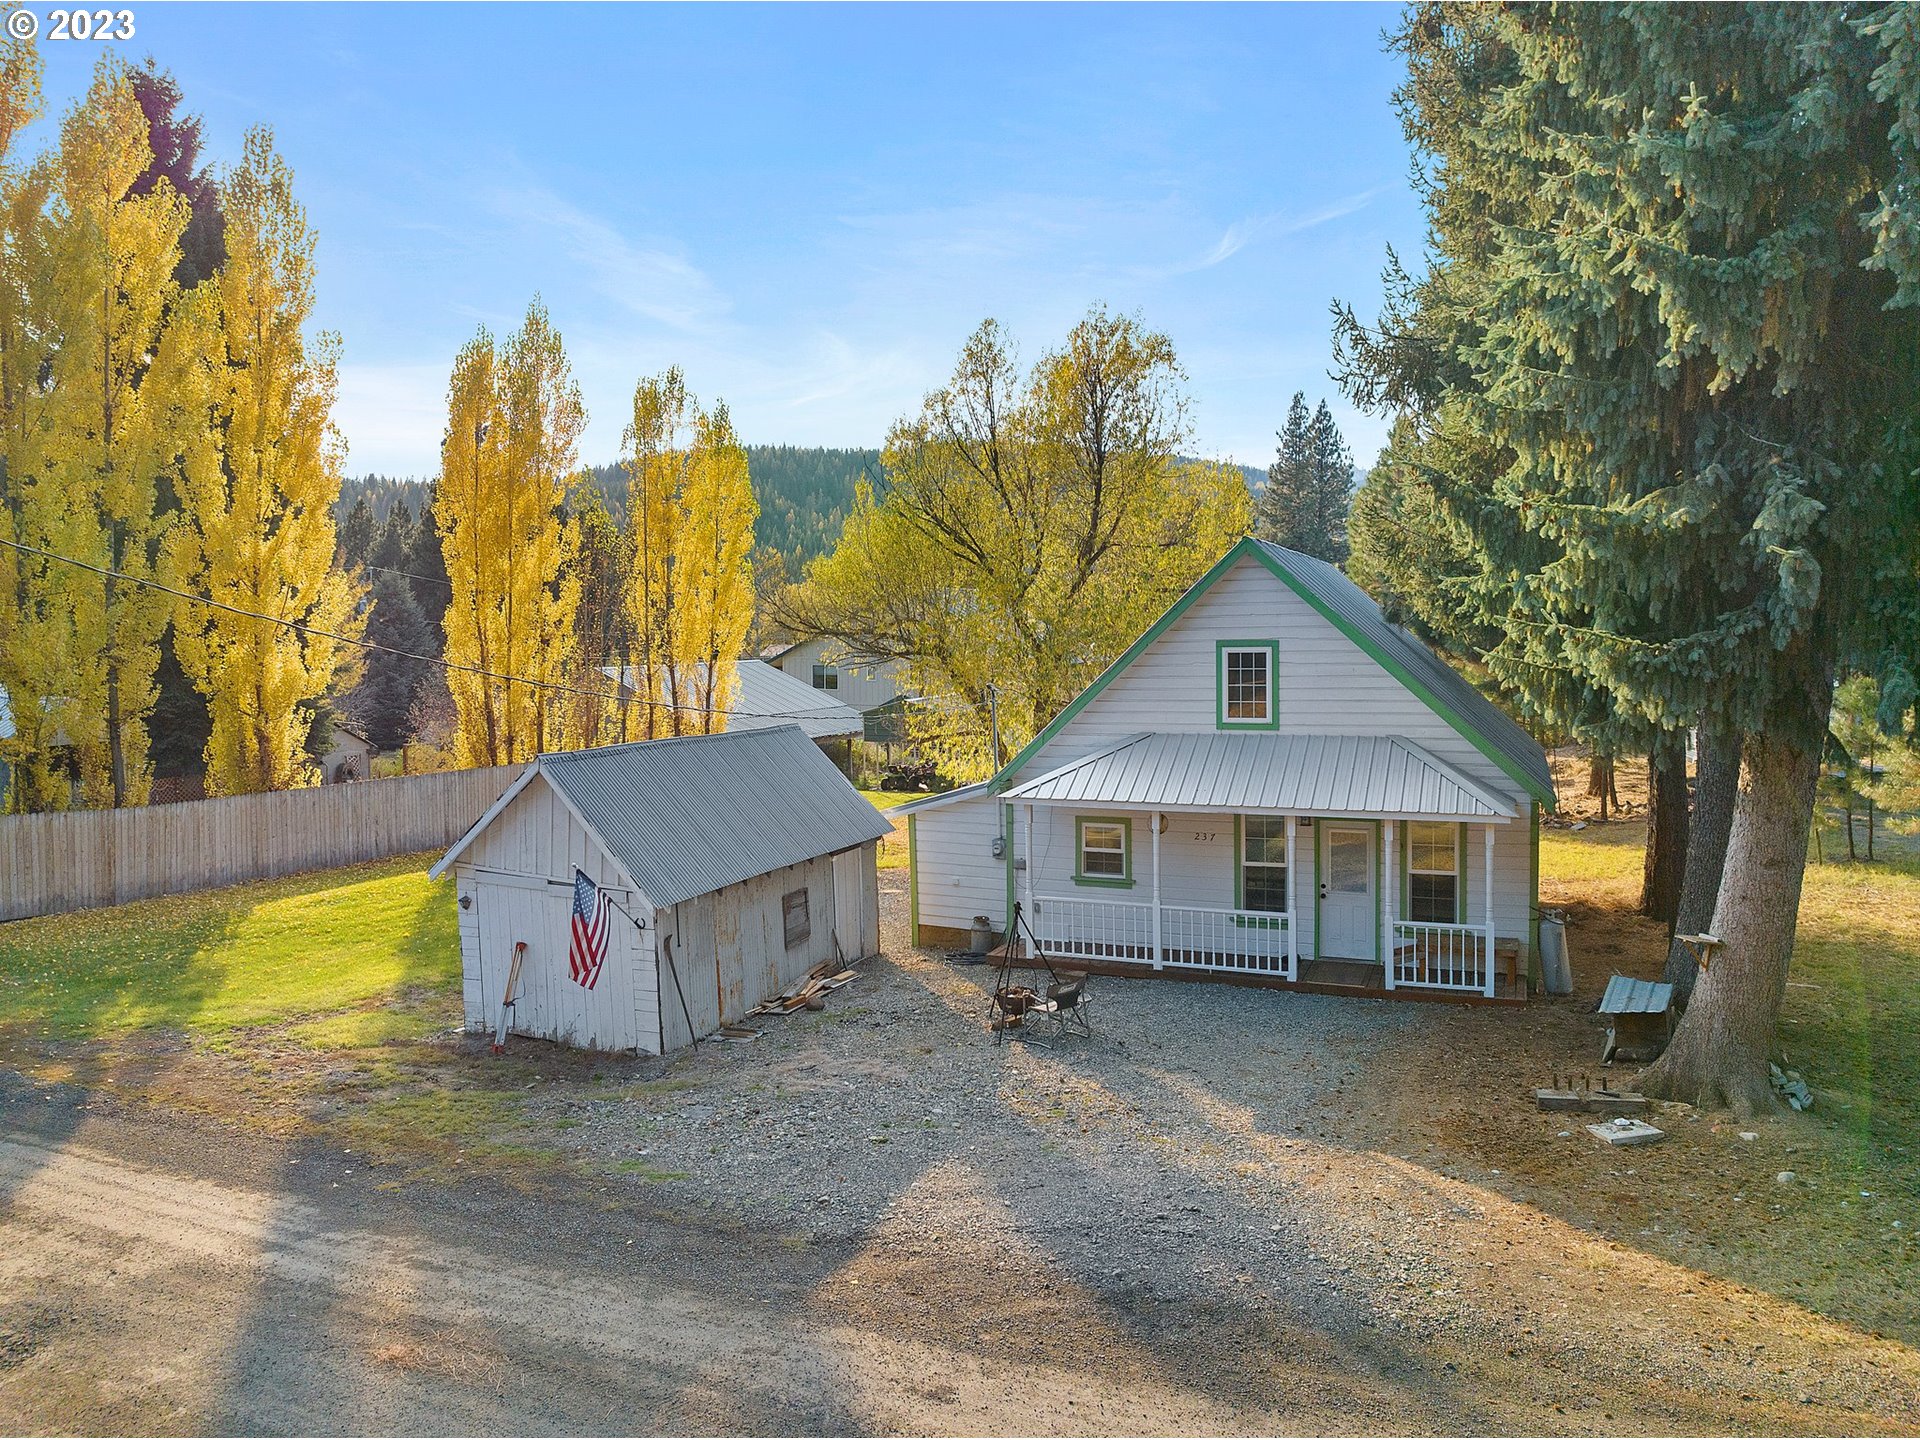 This historic home, wonderfully renovated, puts you right at the center of life in Sumpter, Oregon!  As an old mining town with a deep history and incredible recreational opportunities, Sumpter offers a close community environment where you can feel right at home! With all of the amenities of mountain living, Sumpter and its environs are ideal for the perfect get away homestead, whether as a full time resident or a second home to take in the seasons.  Step right into this remodeled house and settle into the quiet cabin living for a weekend, enjoy gathering friends and family together, or just take in the Sumpter life in all of its curious old mining town ways! Tax lot 2400 (247 Bonanza Street) is available for purchase separately or with current tax lot.